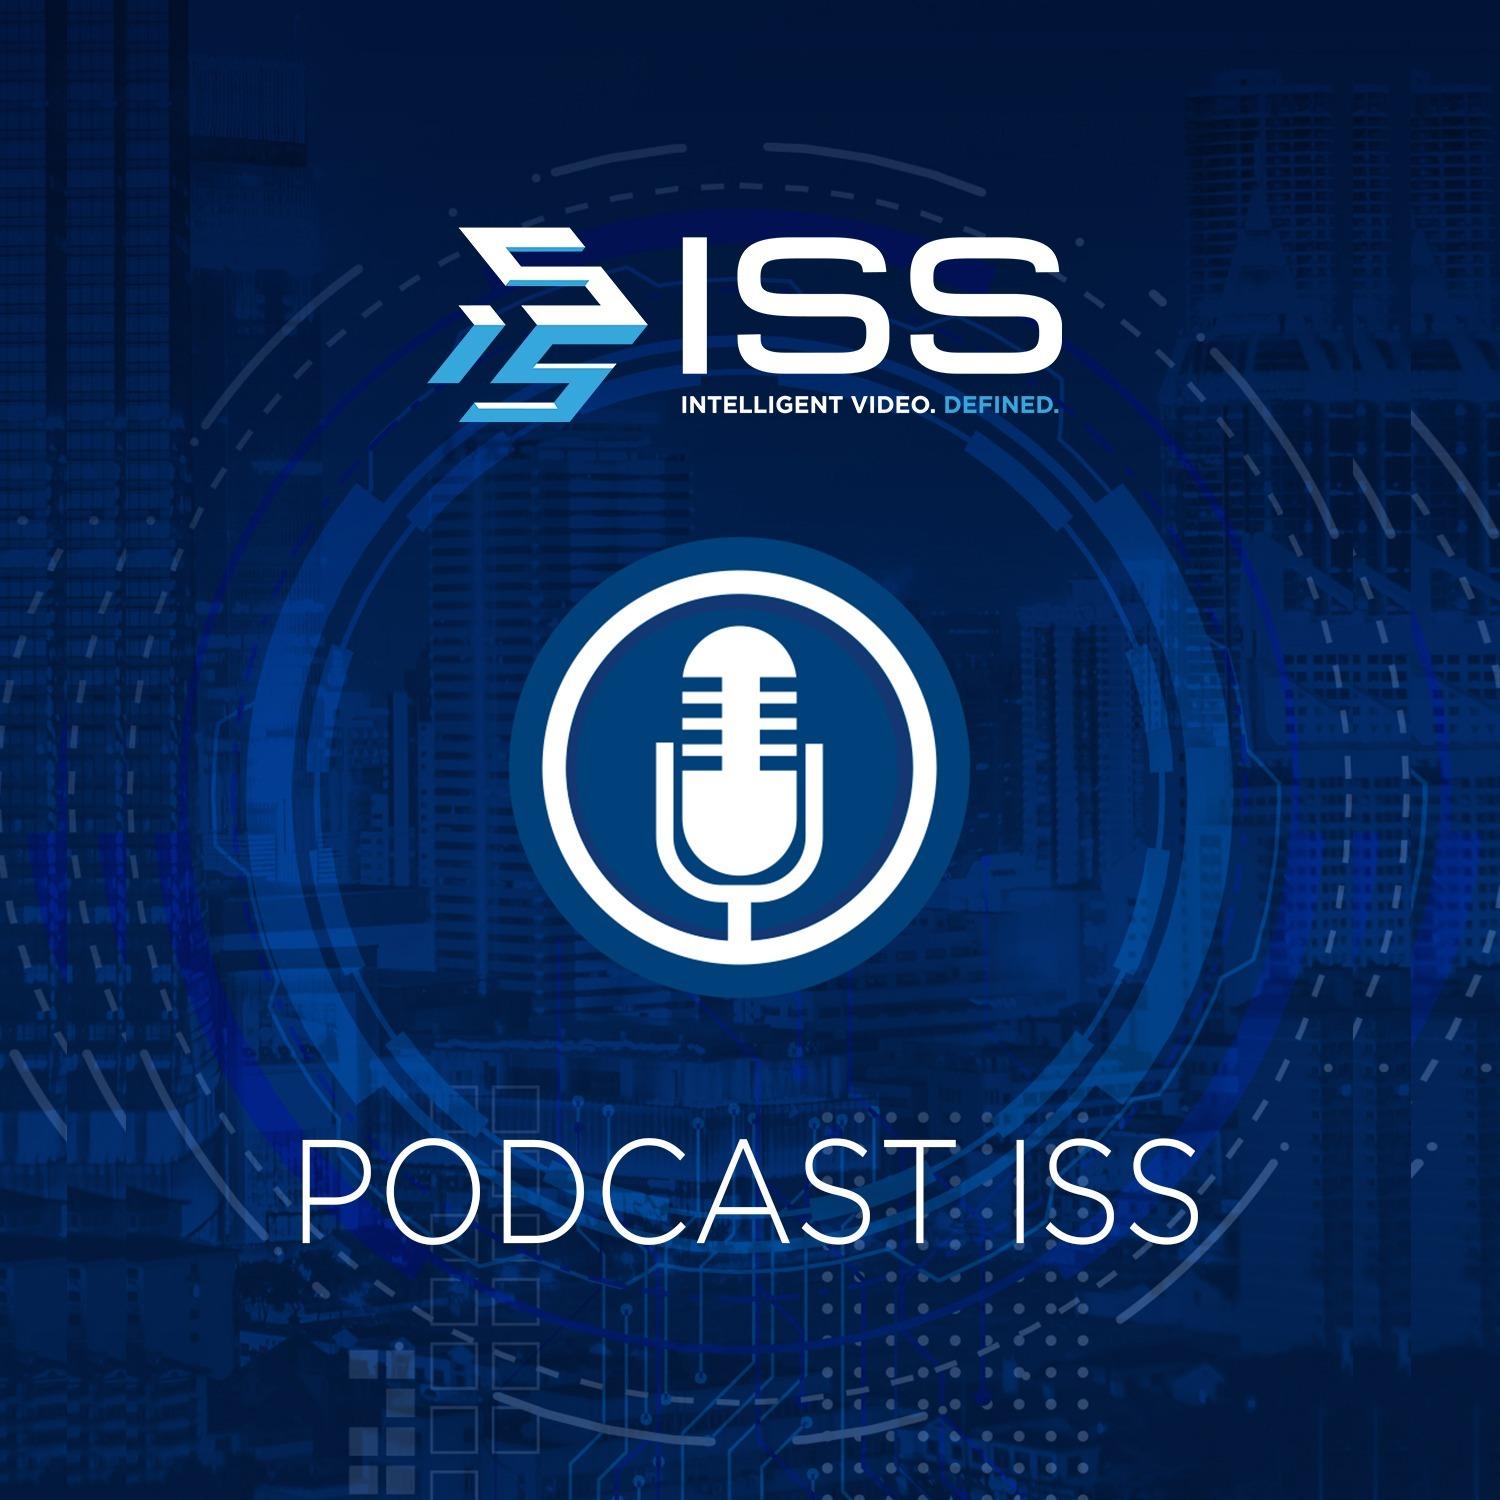 Podcast ISS